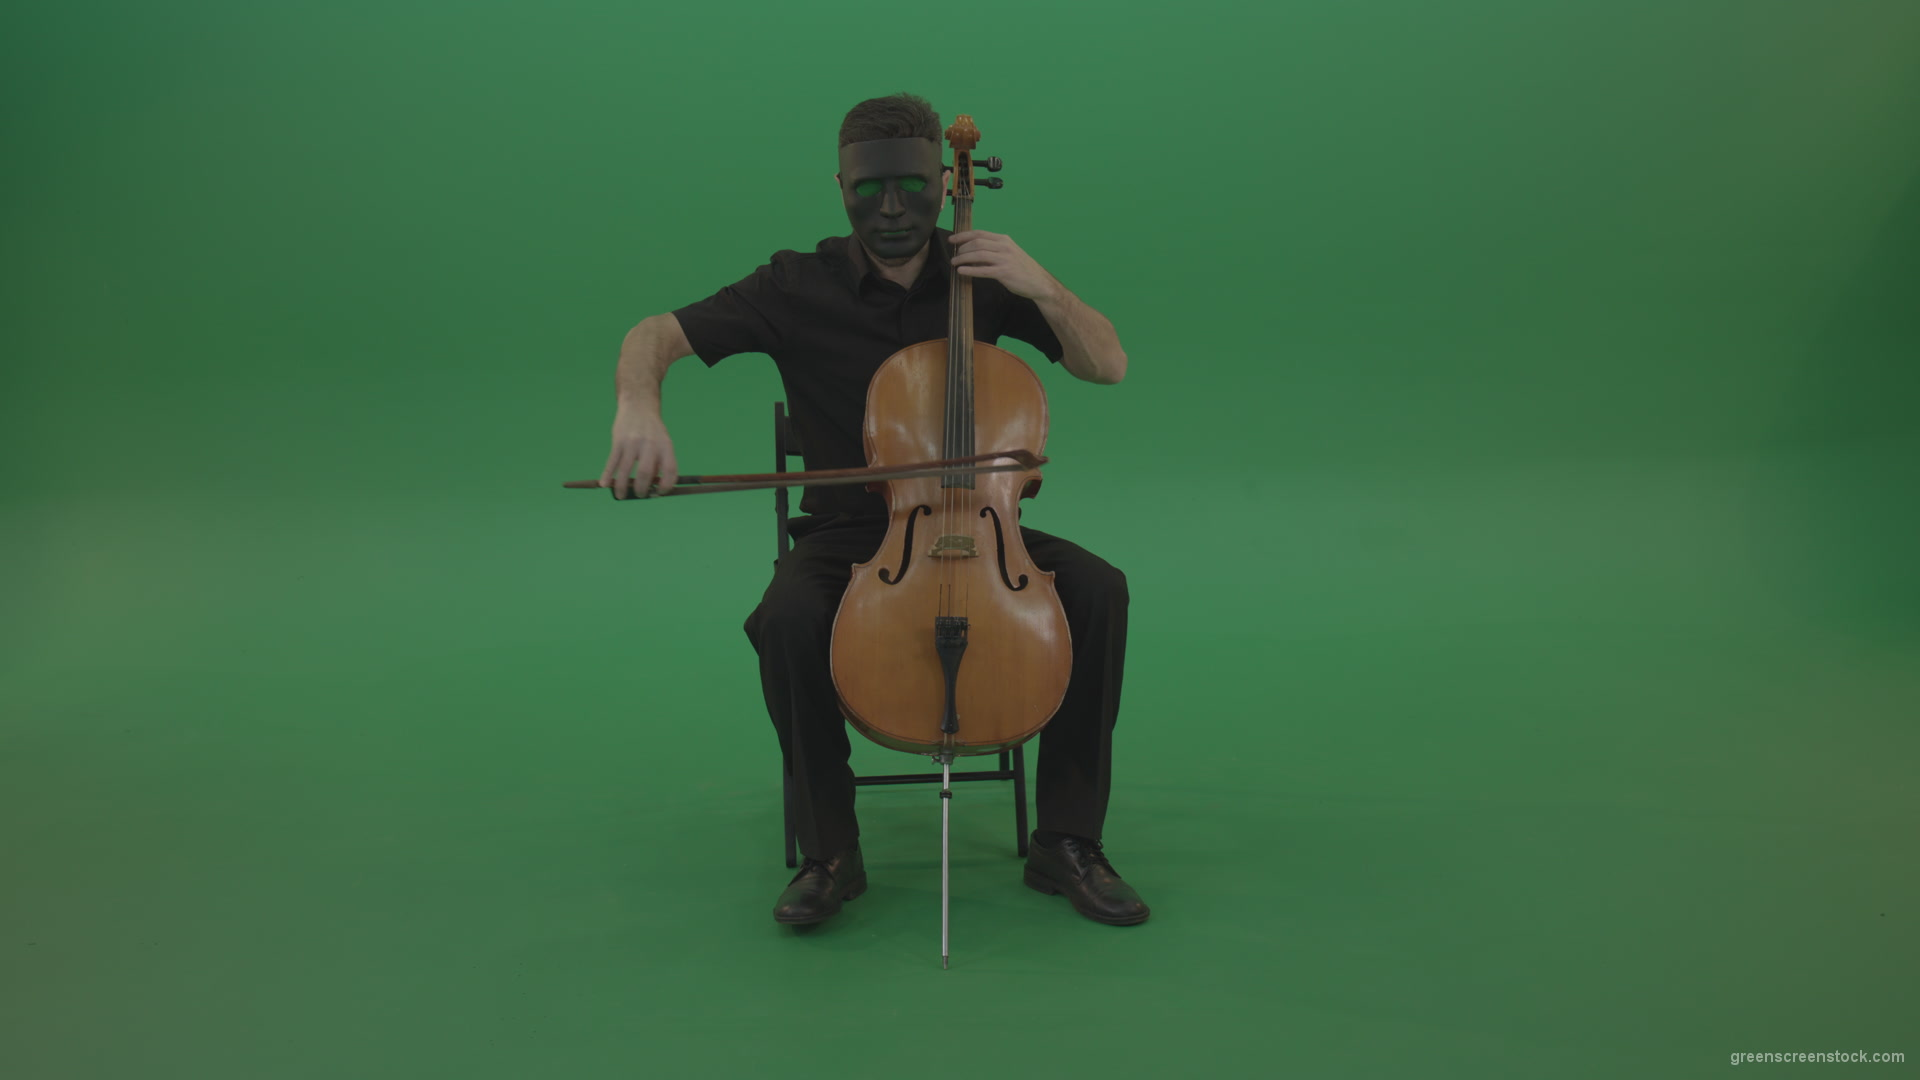 Full-size-man-in-black-wear-and-mask-play-violoncello-cello-strings-music-instrument-isolated-on-green-screen_004 Green Screen Stock